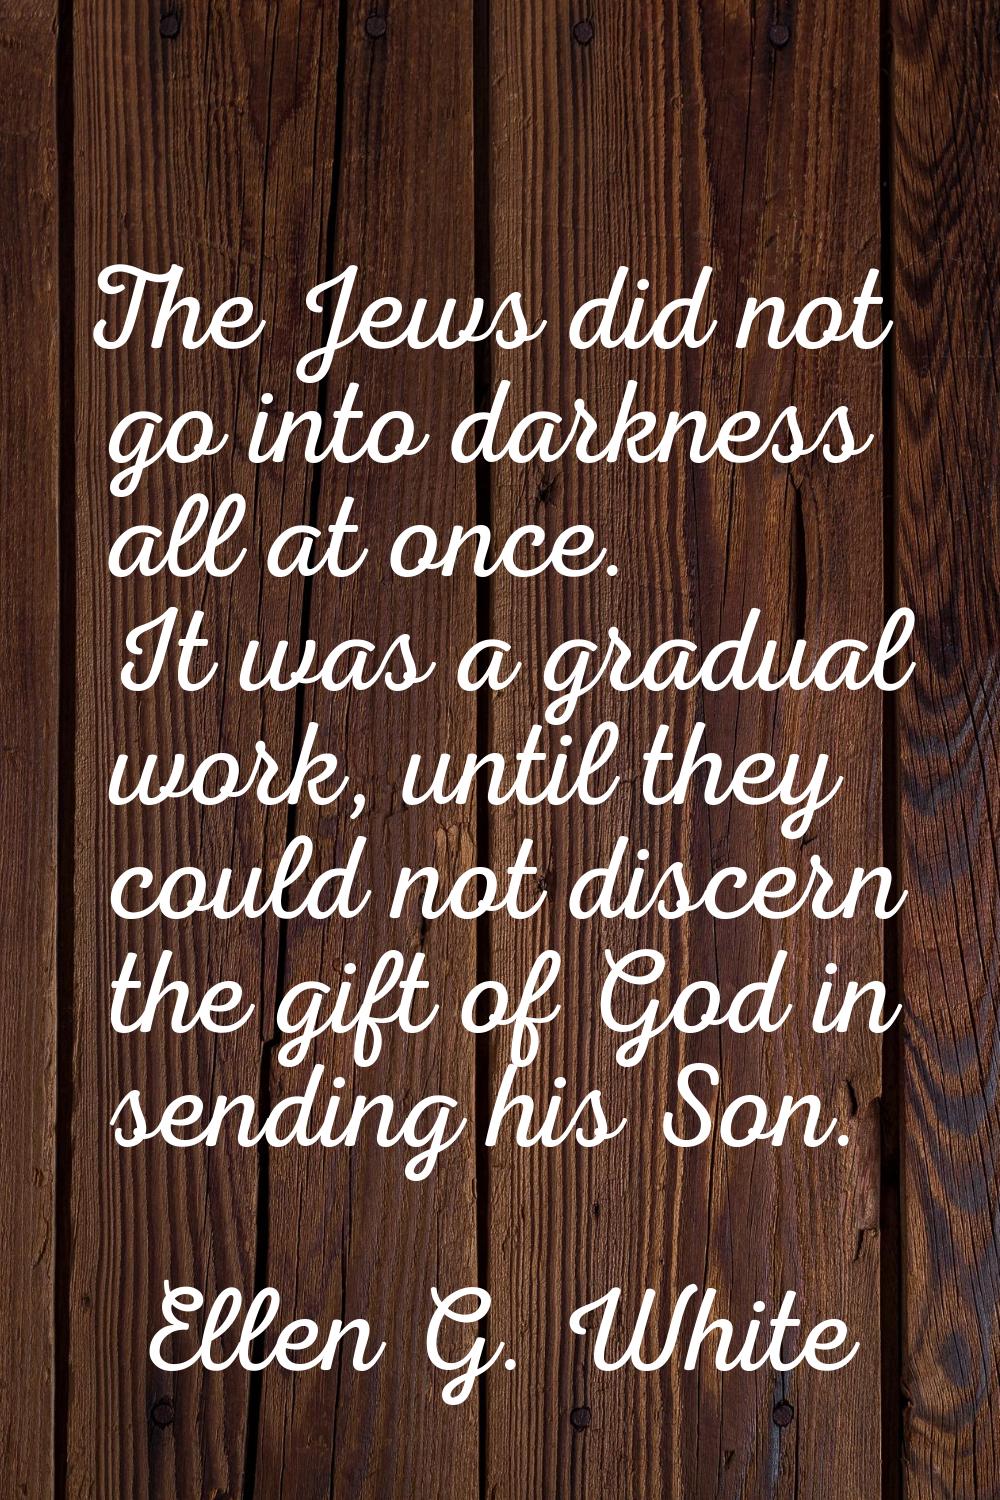 The Jews did not go into darkness all at once. It was a gradual work, until they could not discern 